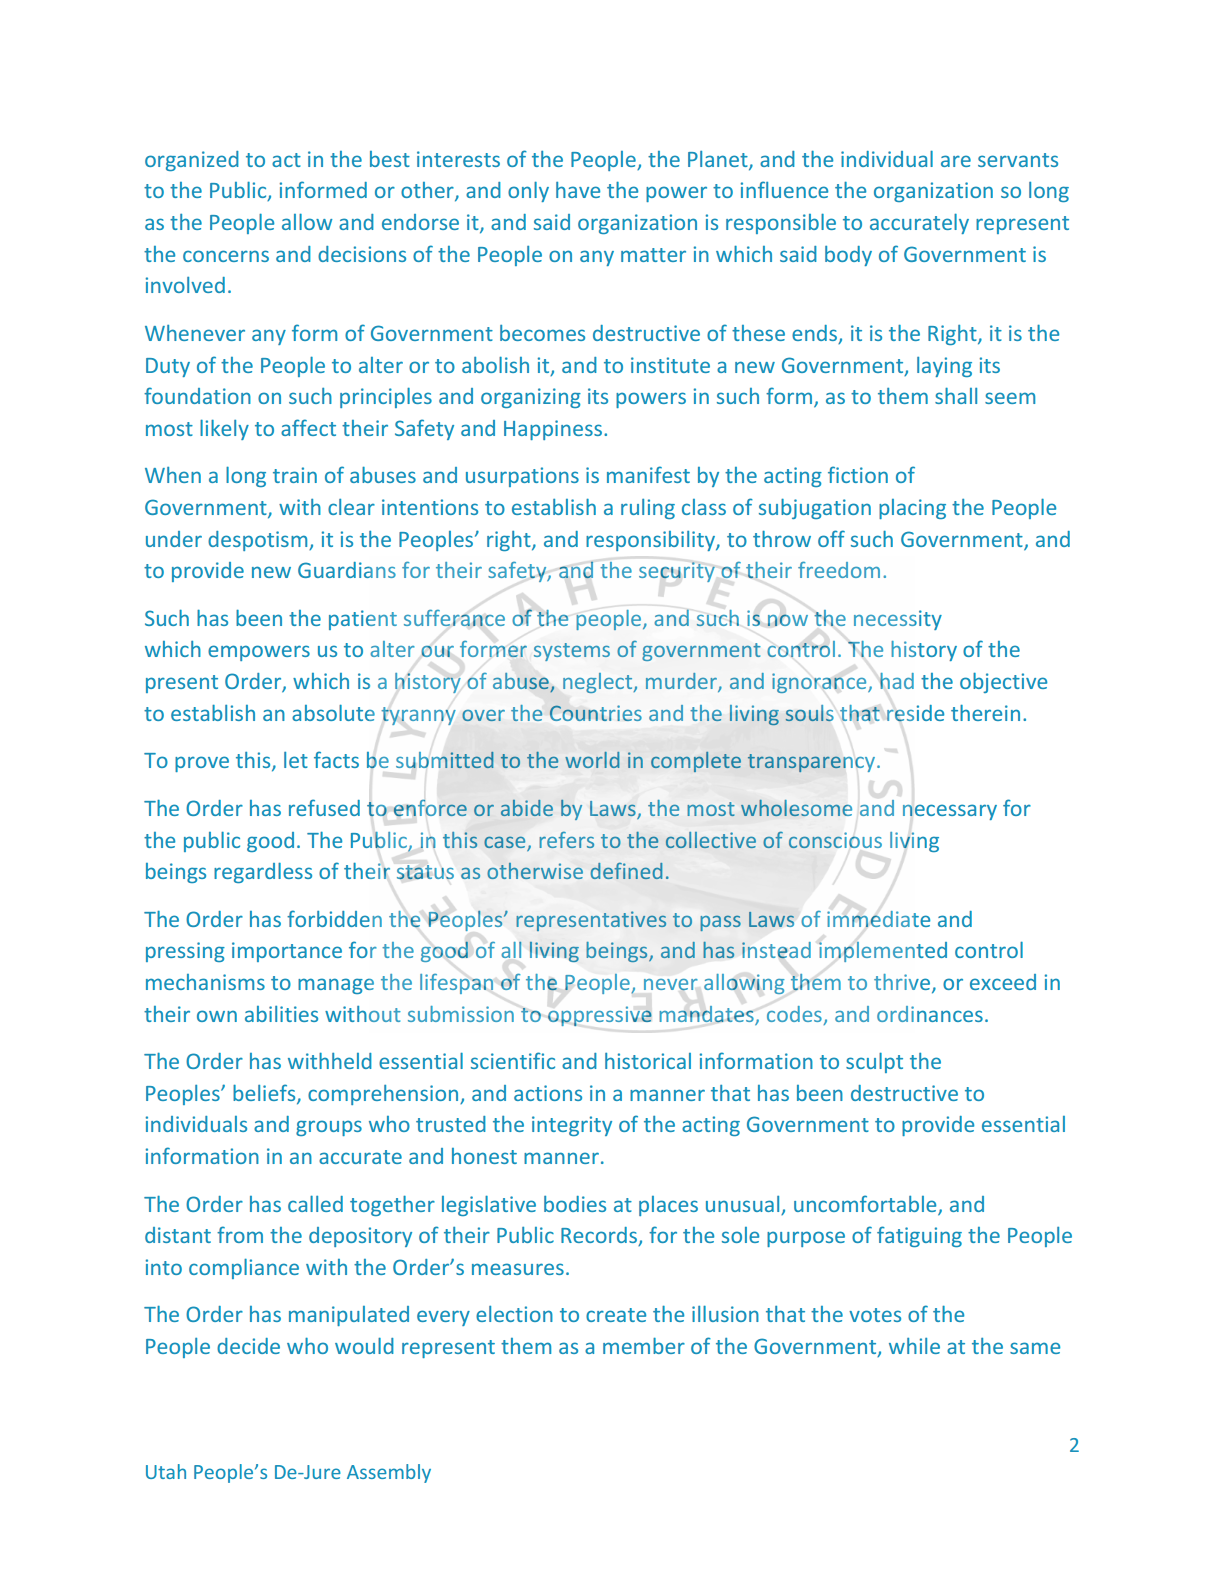 New Declaration of Independence 2s p2png_Page2